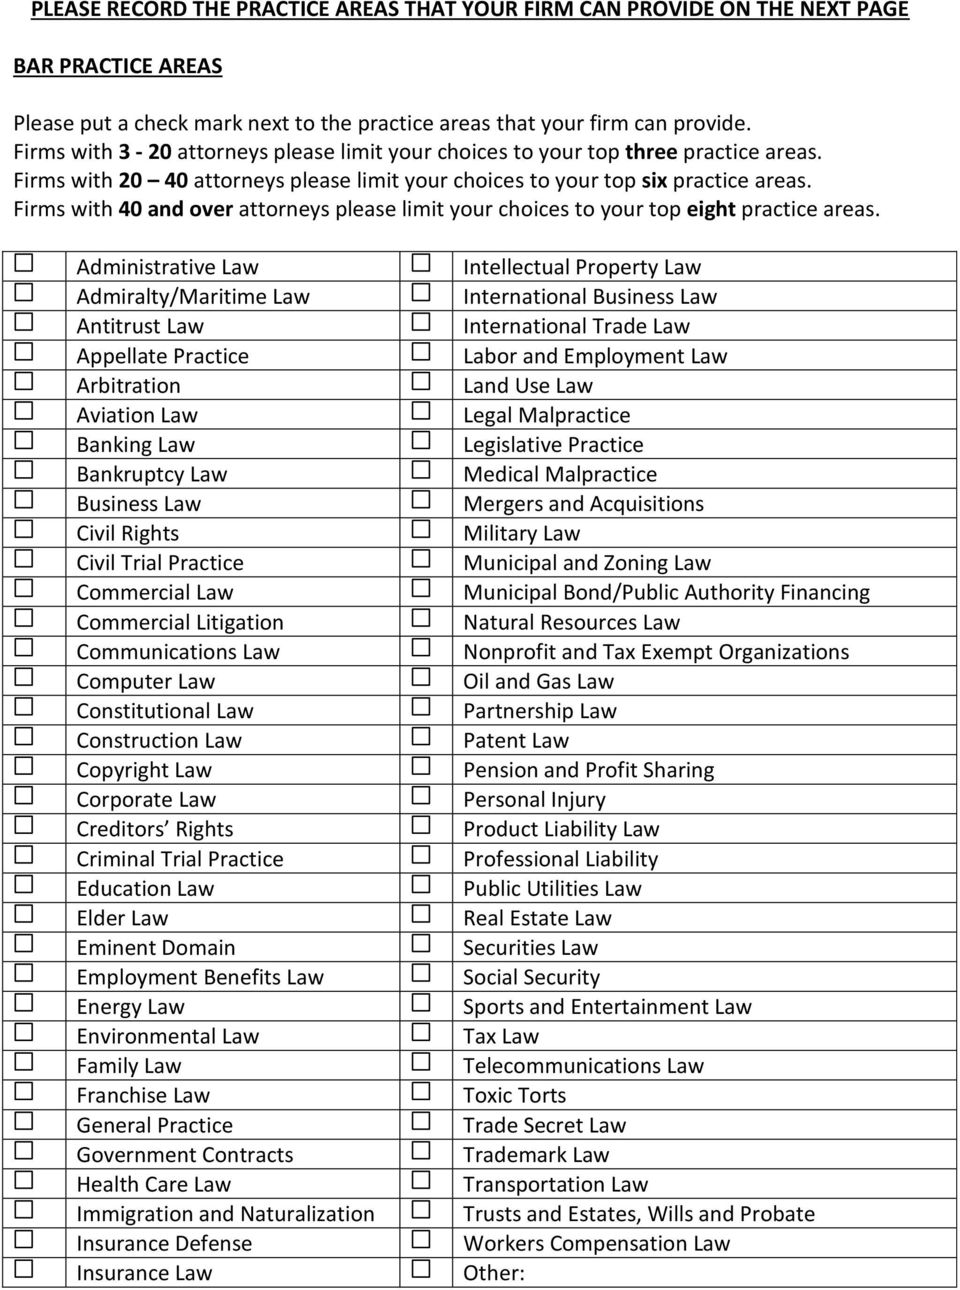 Firms with 40 and over attorneys please limit your choices to your top eight practice areas.